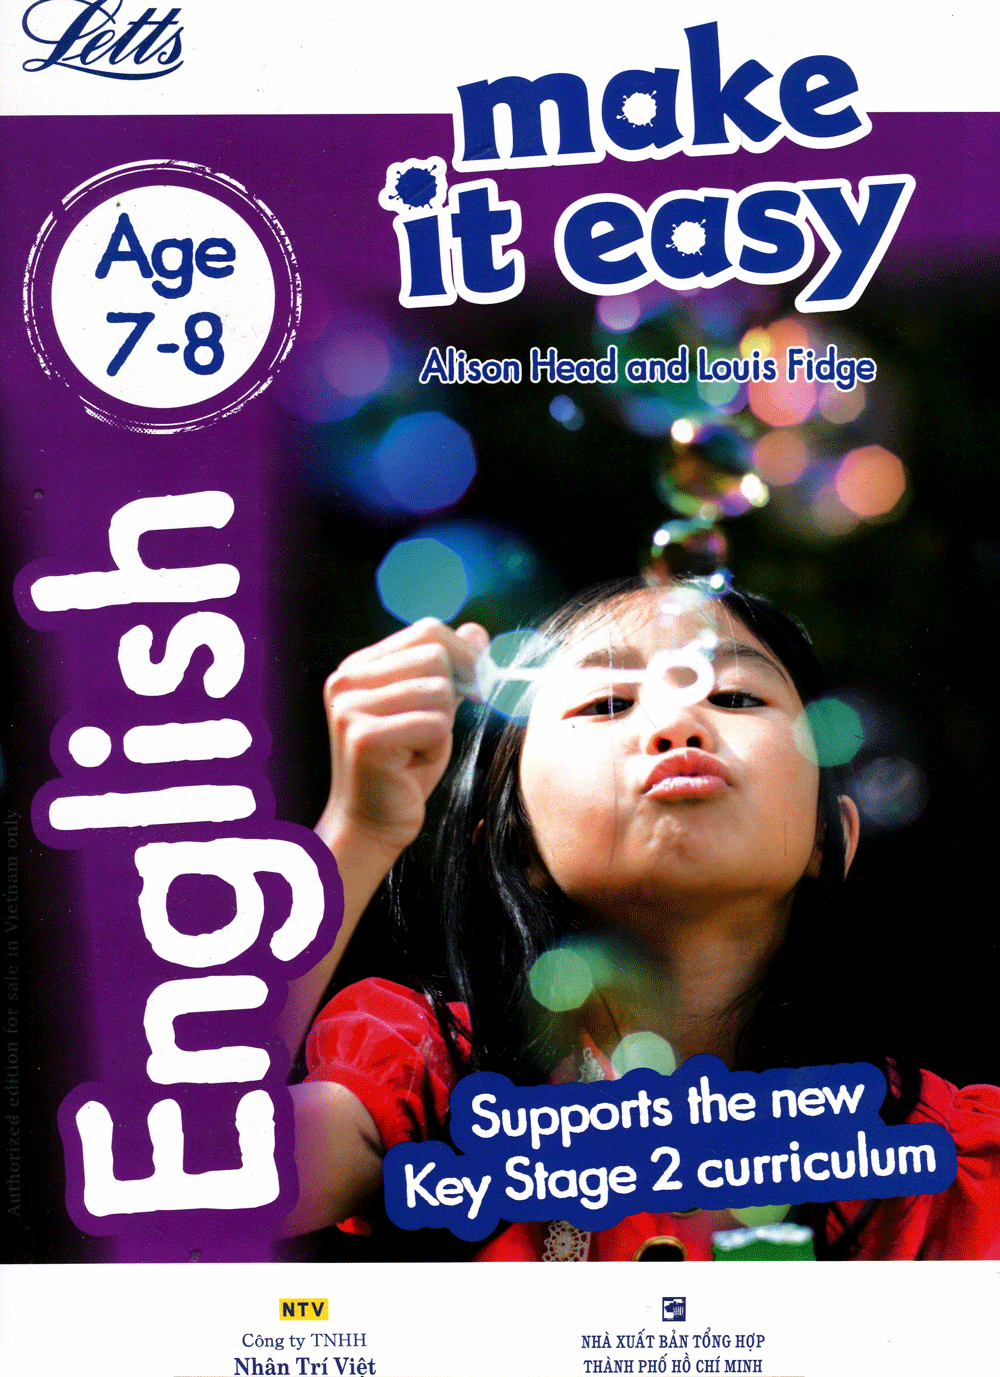 Letts Make It Easy - English (Age 7-8)